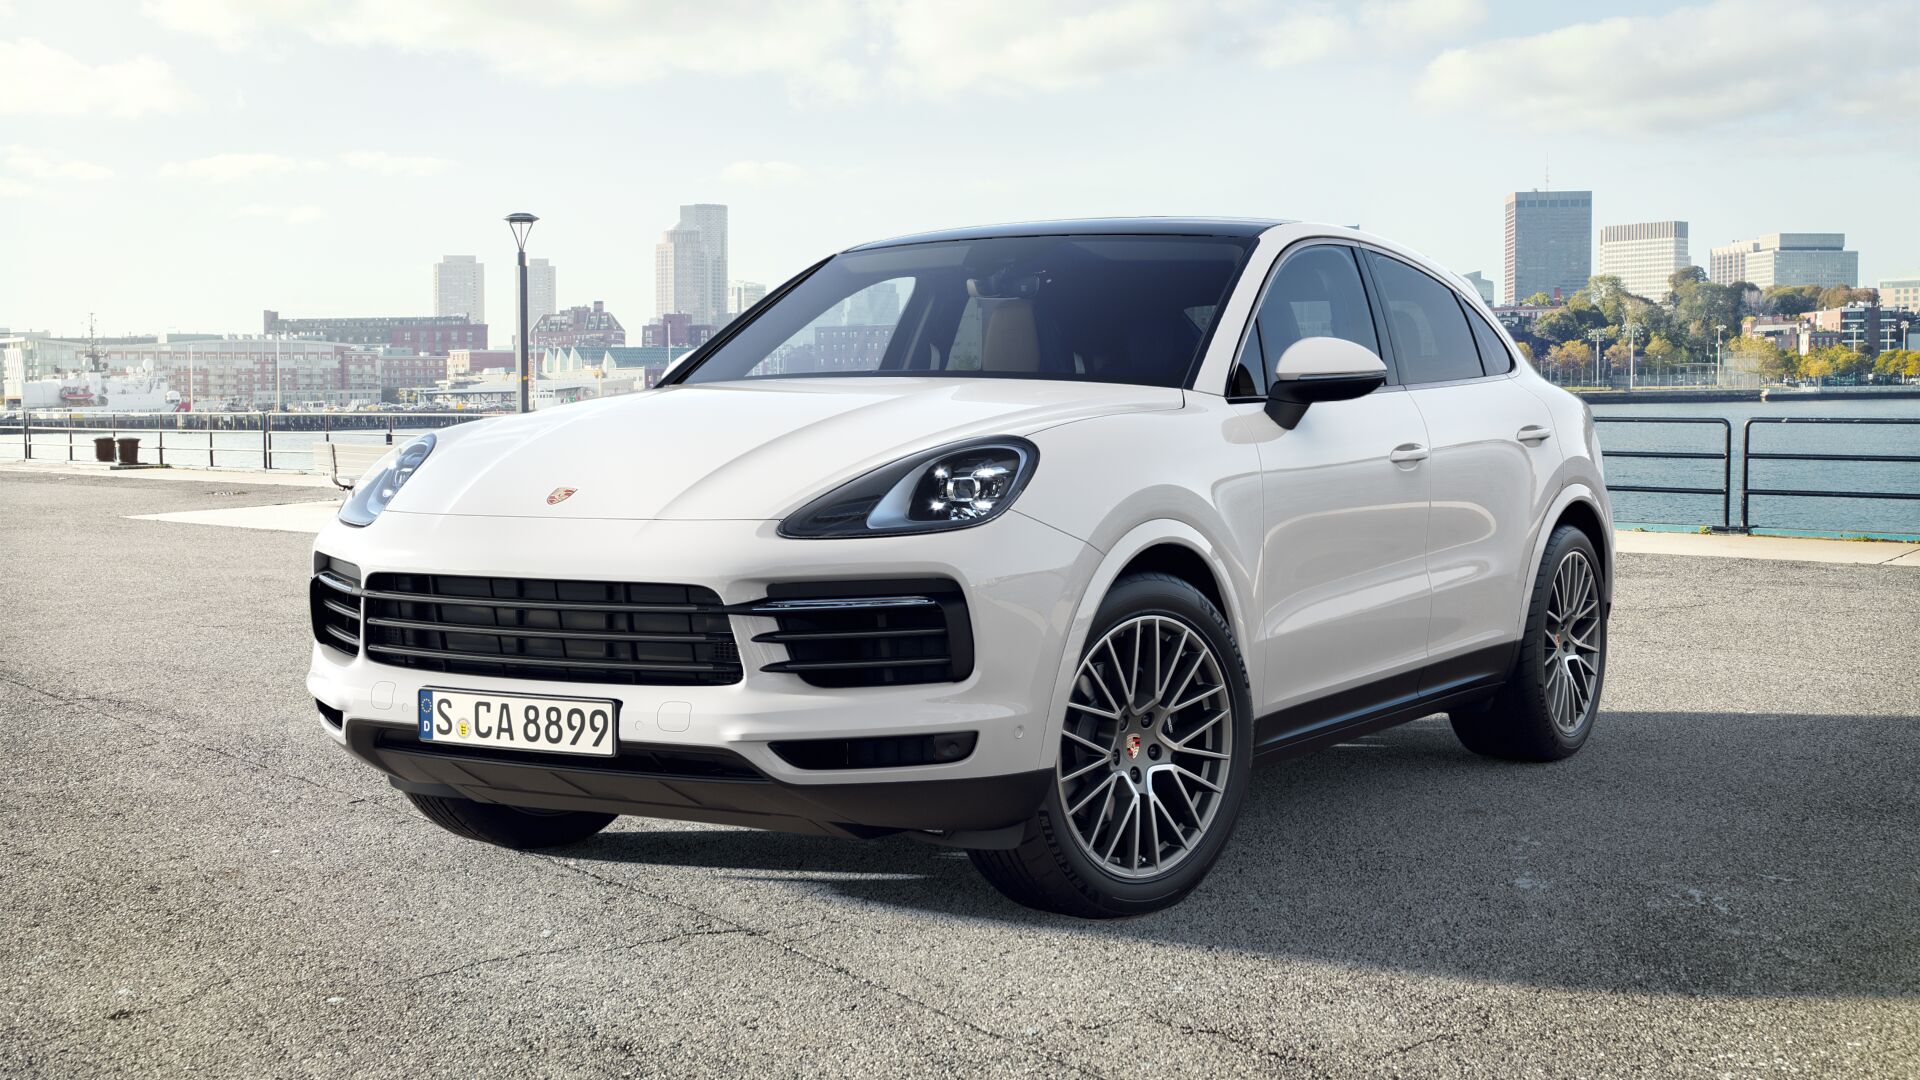 A new electric Porsche SUV in the perfect color and with all the options, with a range of up to 300 km and a top speed that allows for short trips, you can find the latest 2023 Porsche models at Porsche South Orlando.